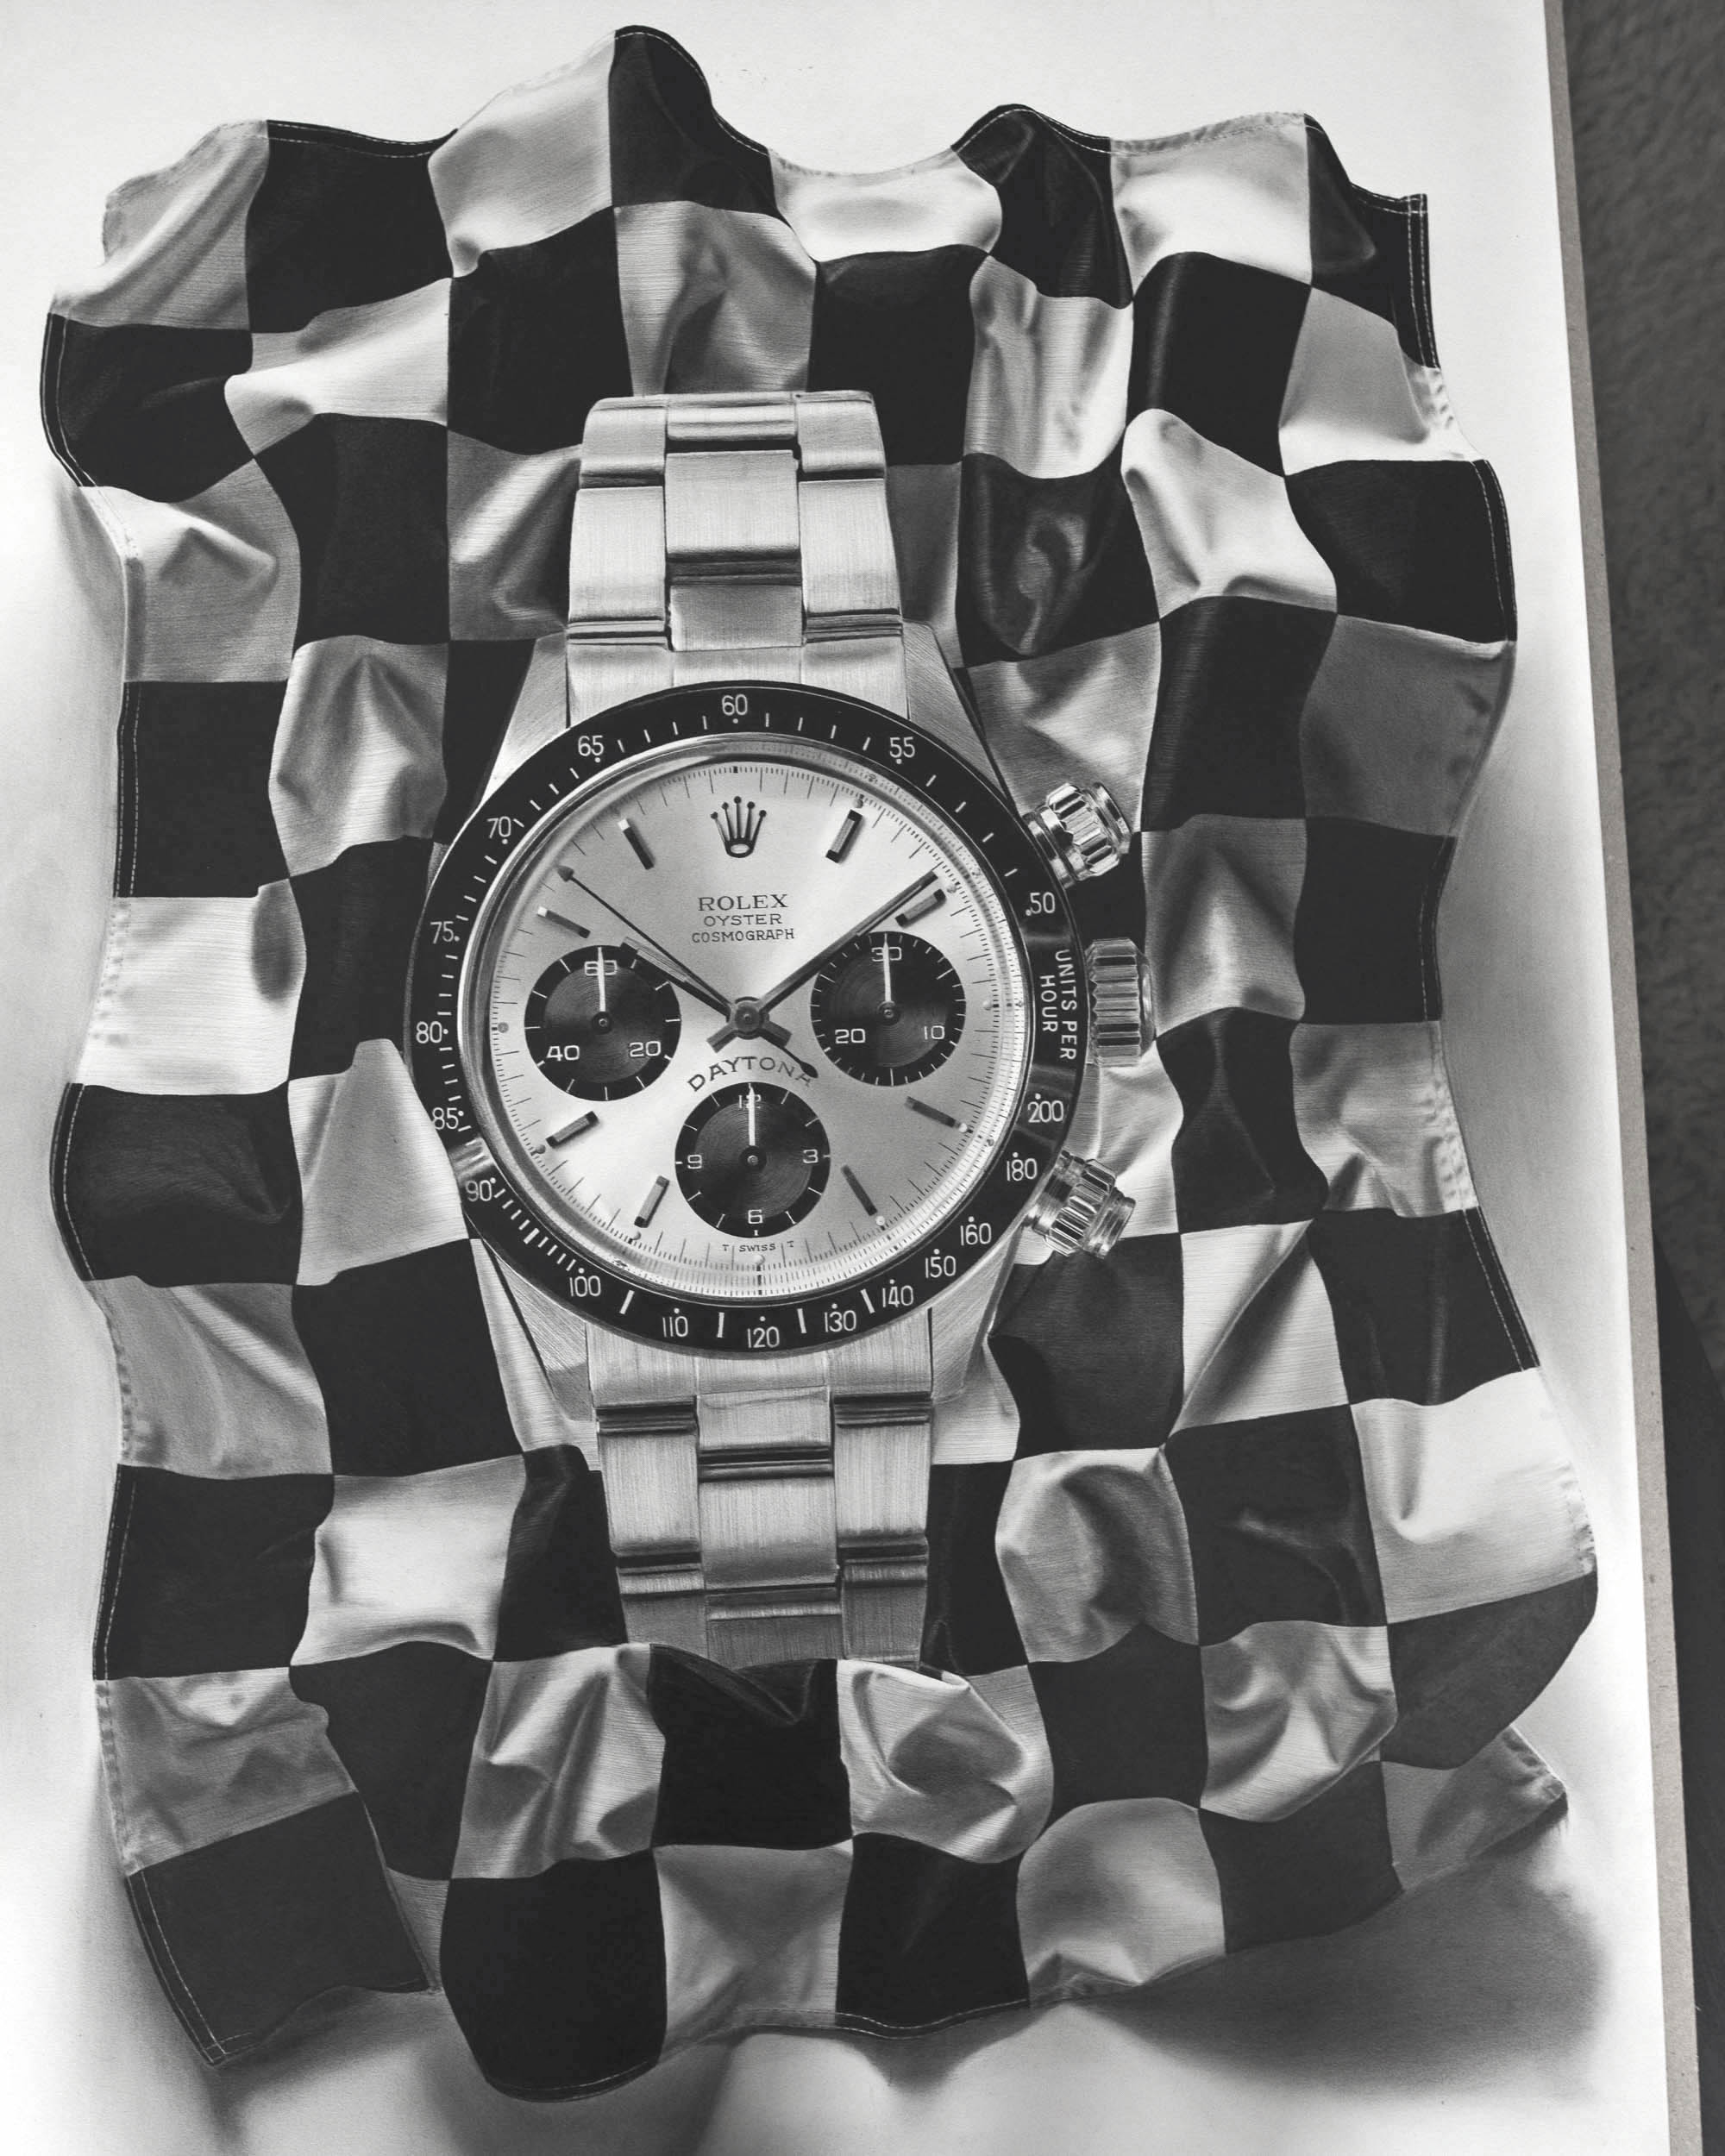 Art Tribute To The Rolex Cosmograph Daytona 6263: New Horological